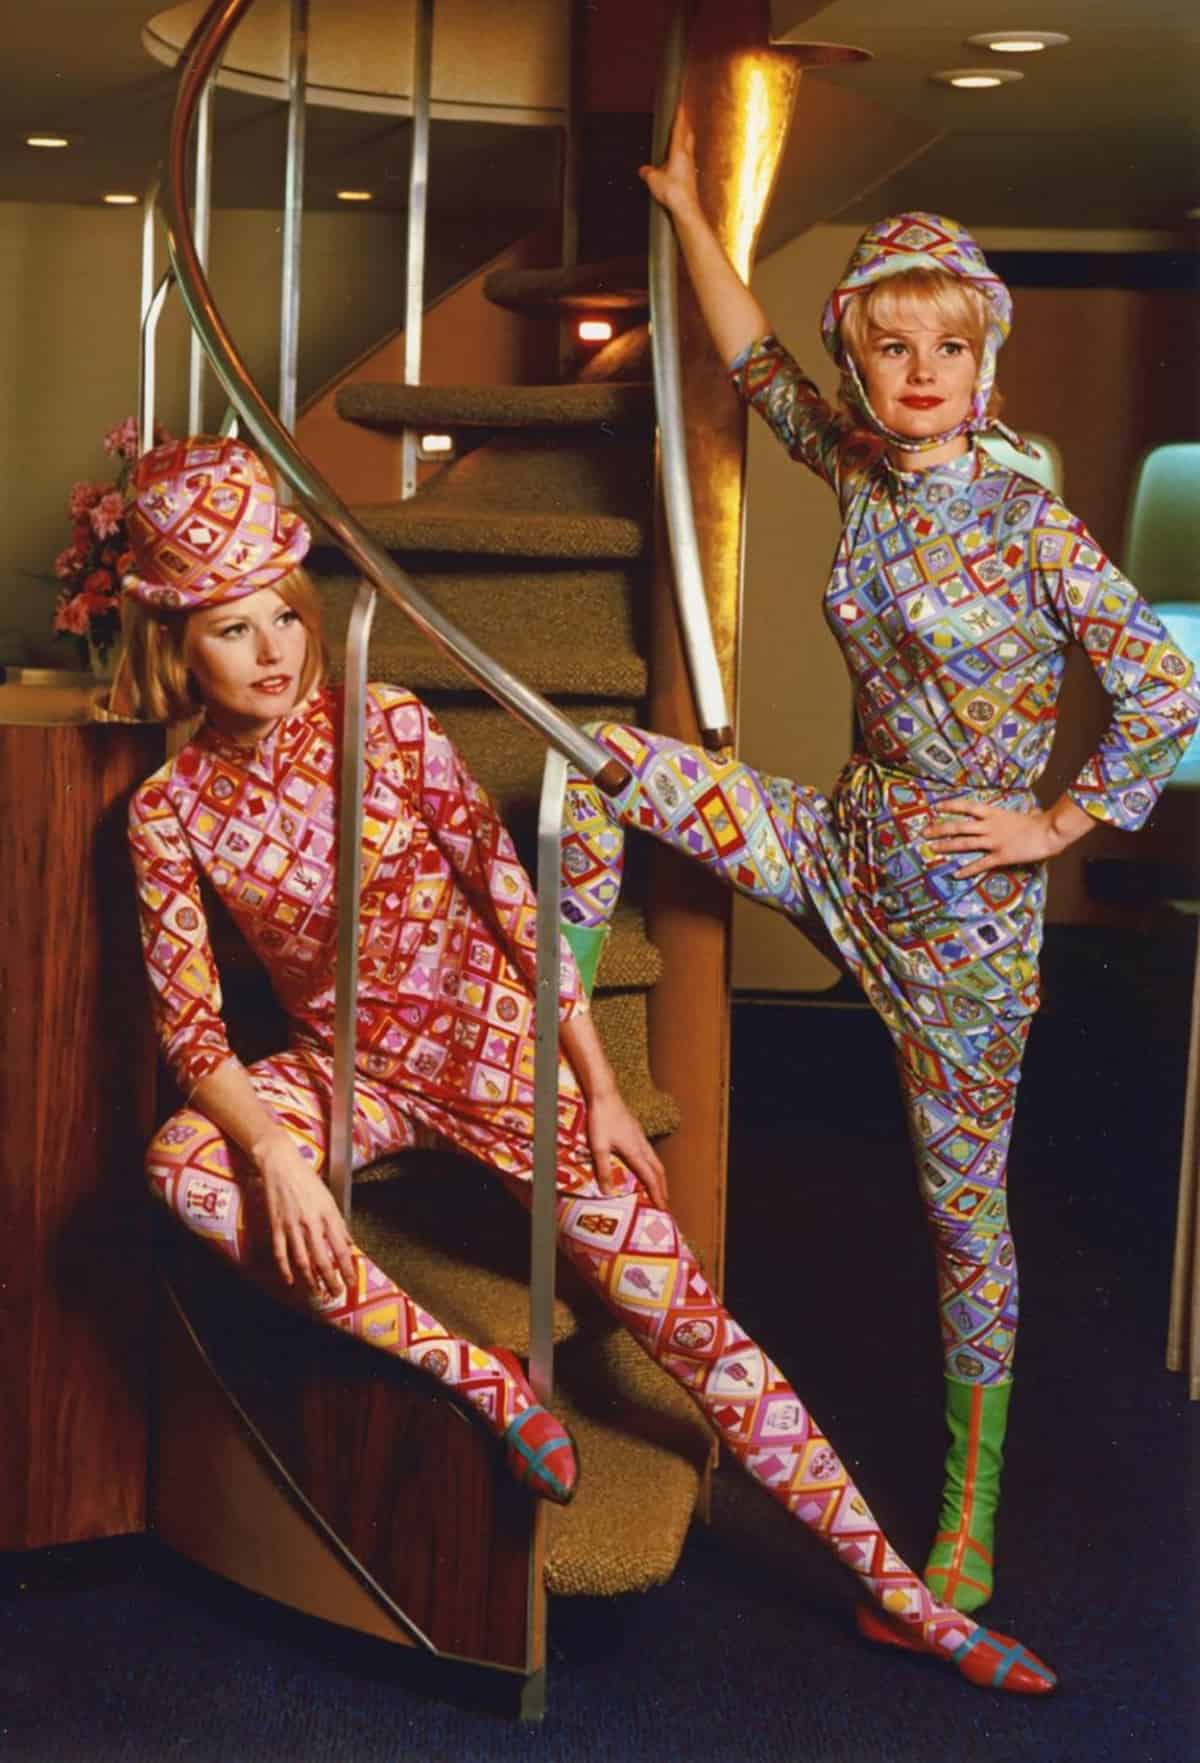 Braniff and Pucci, 1960s